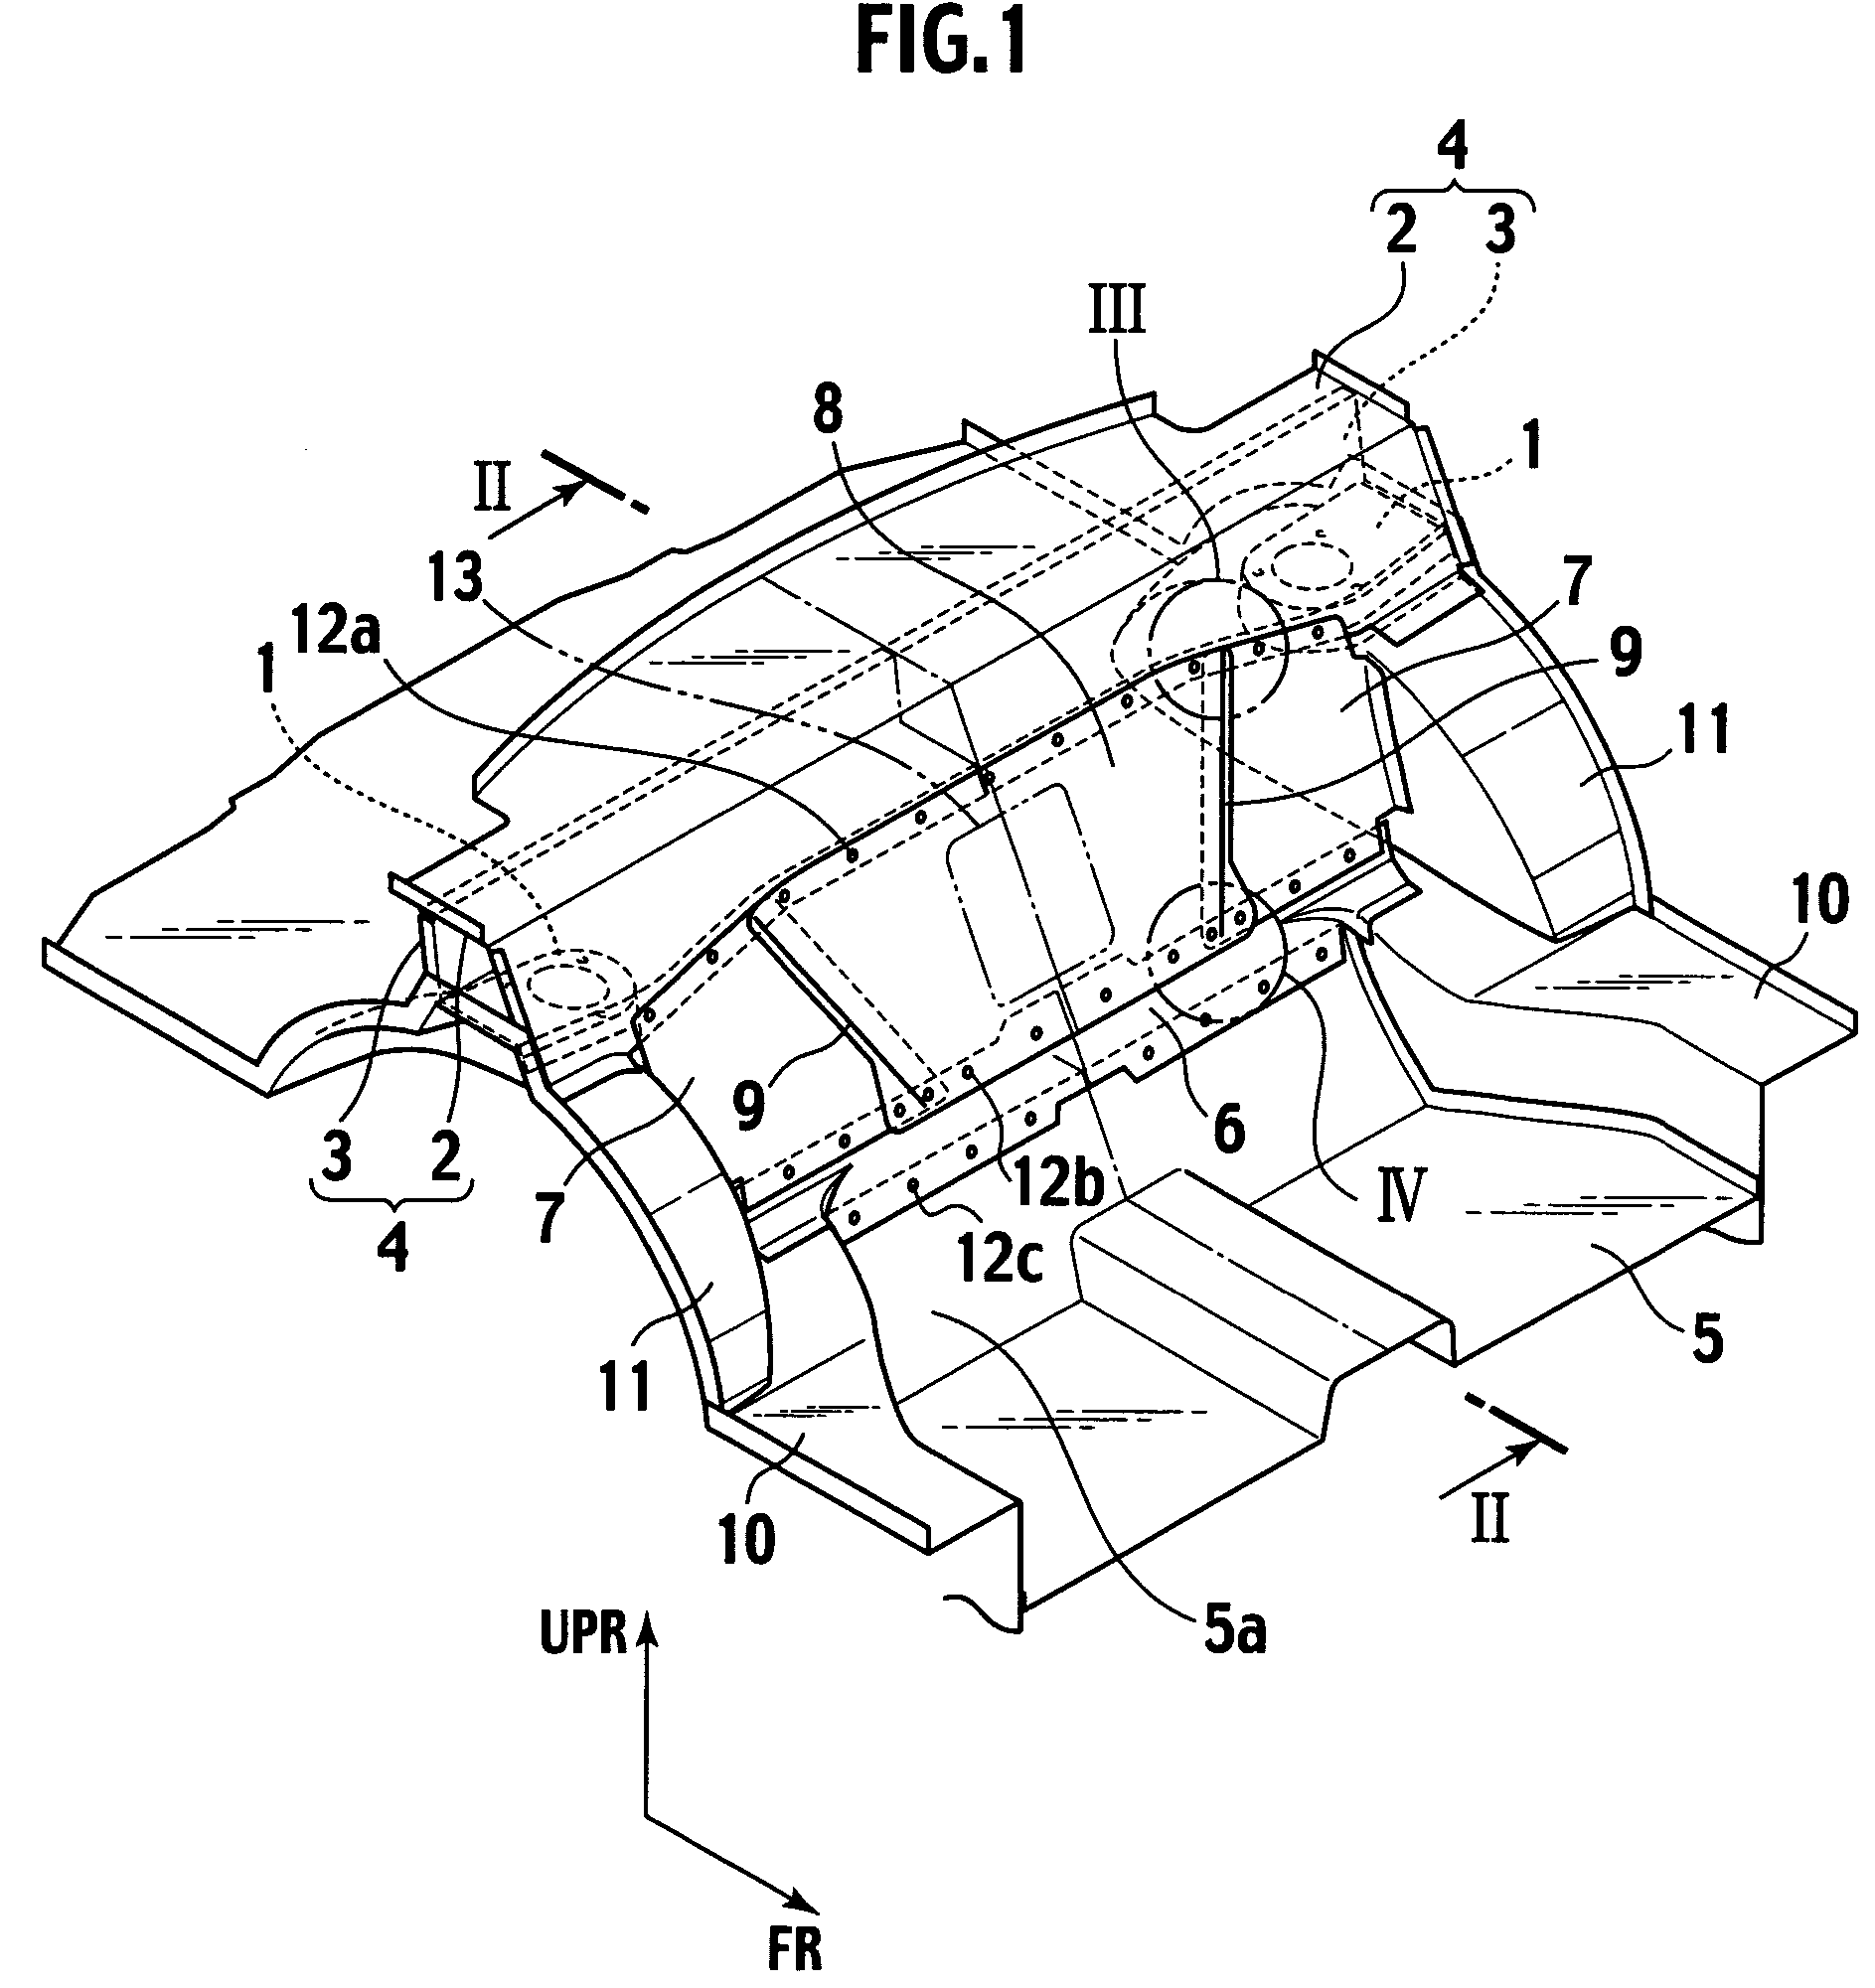 Vehicle rear body structure